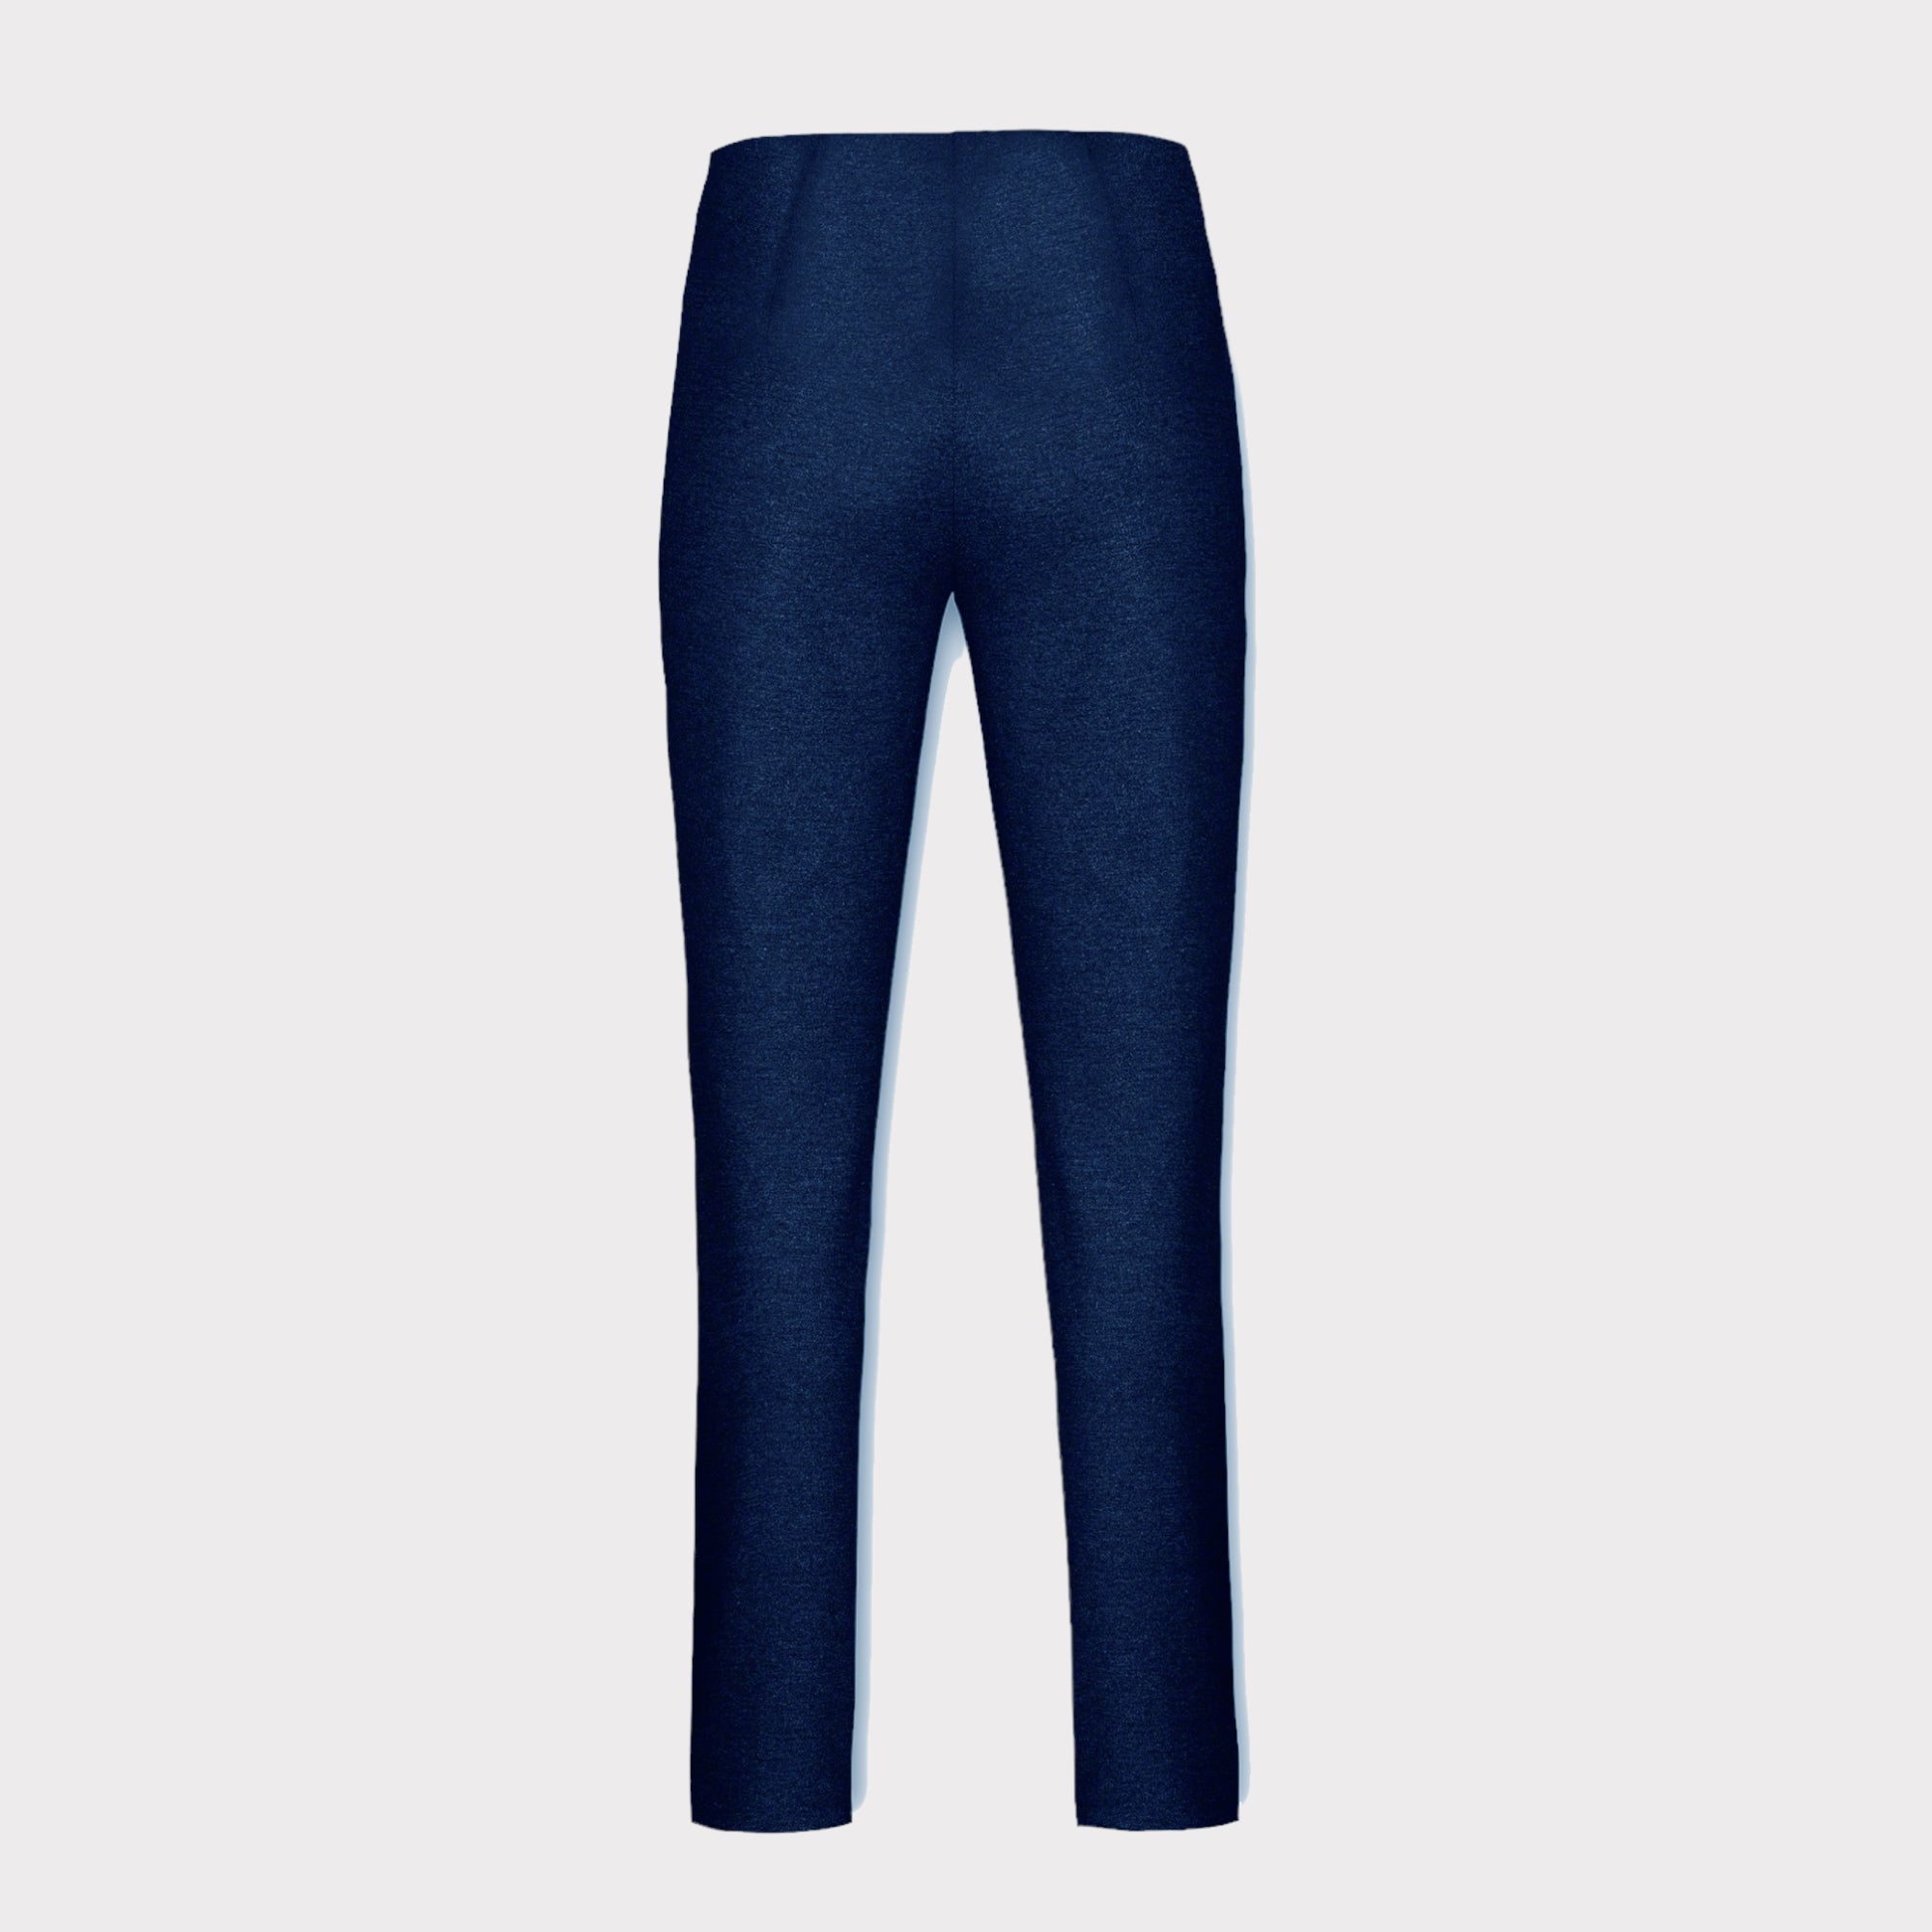 Robell Mimi Stretch Trousers Navy